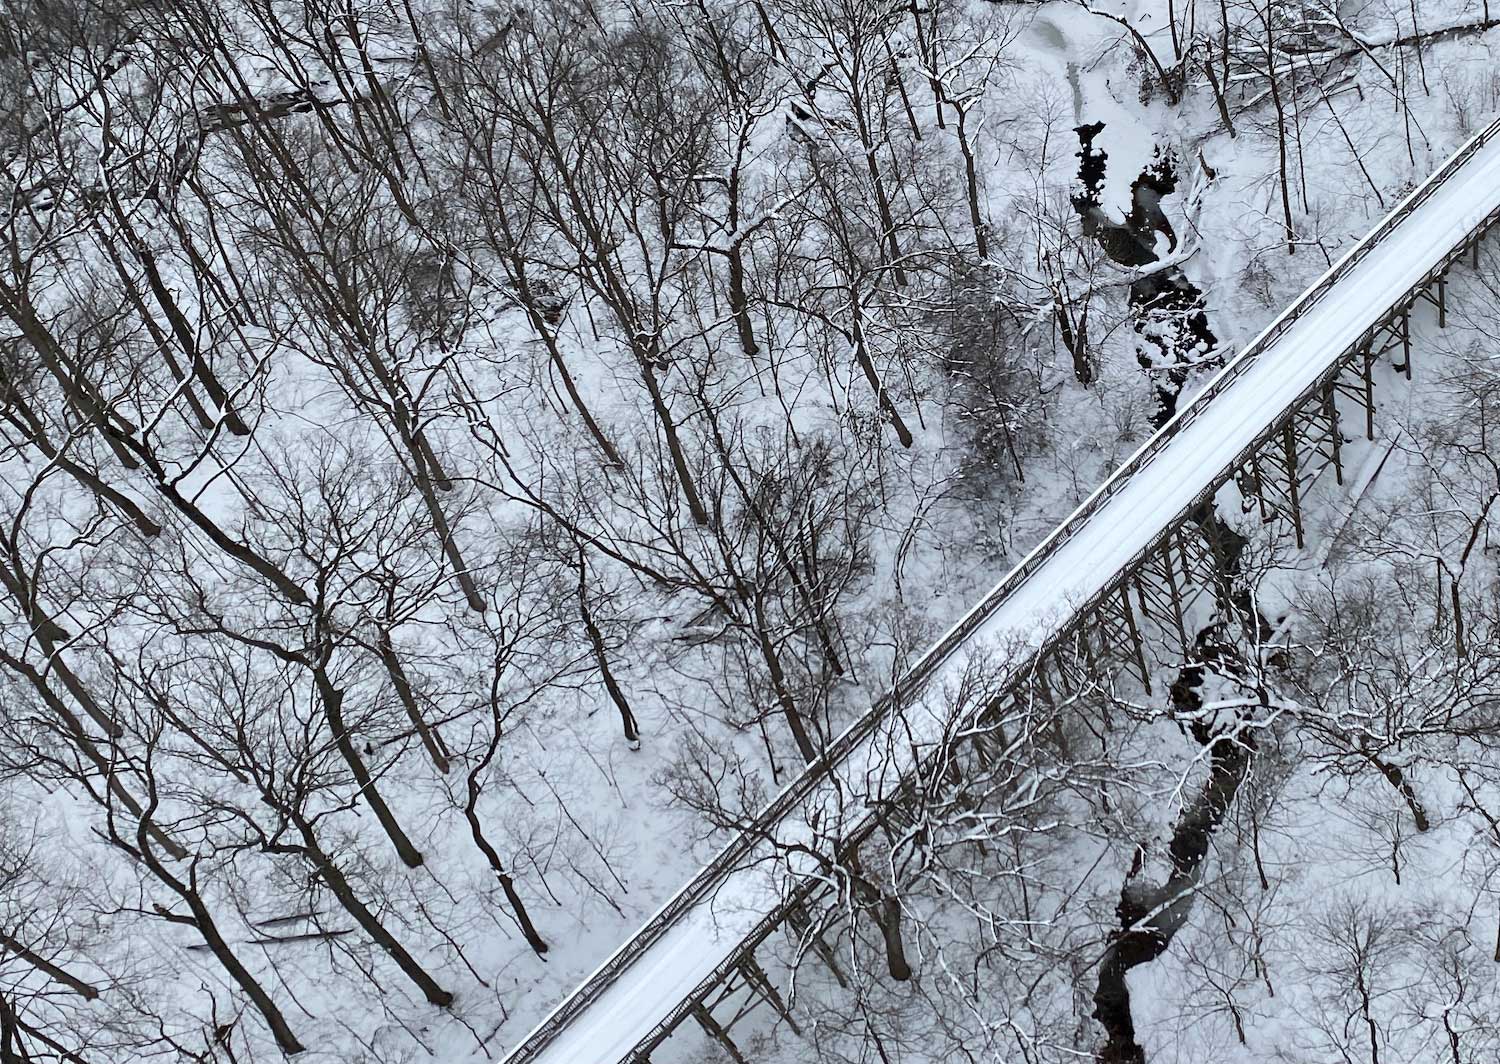 An aerial view of a snow-covered bridge.